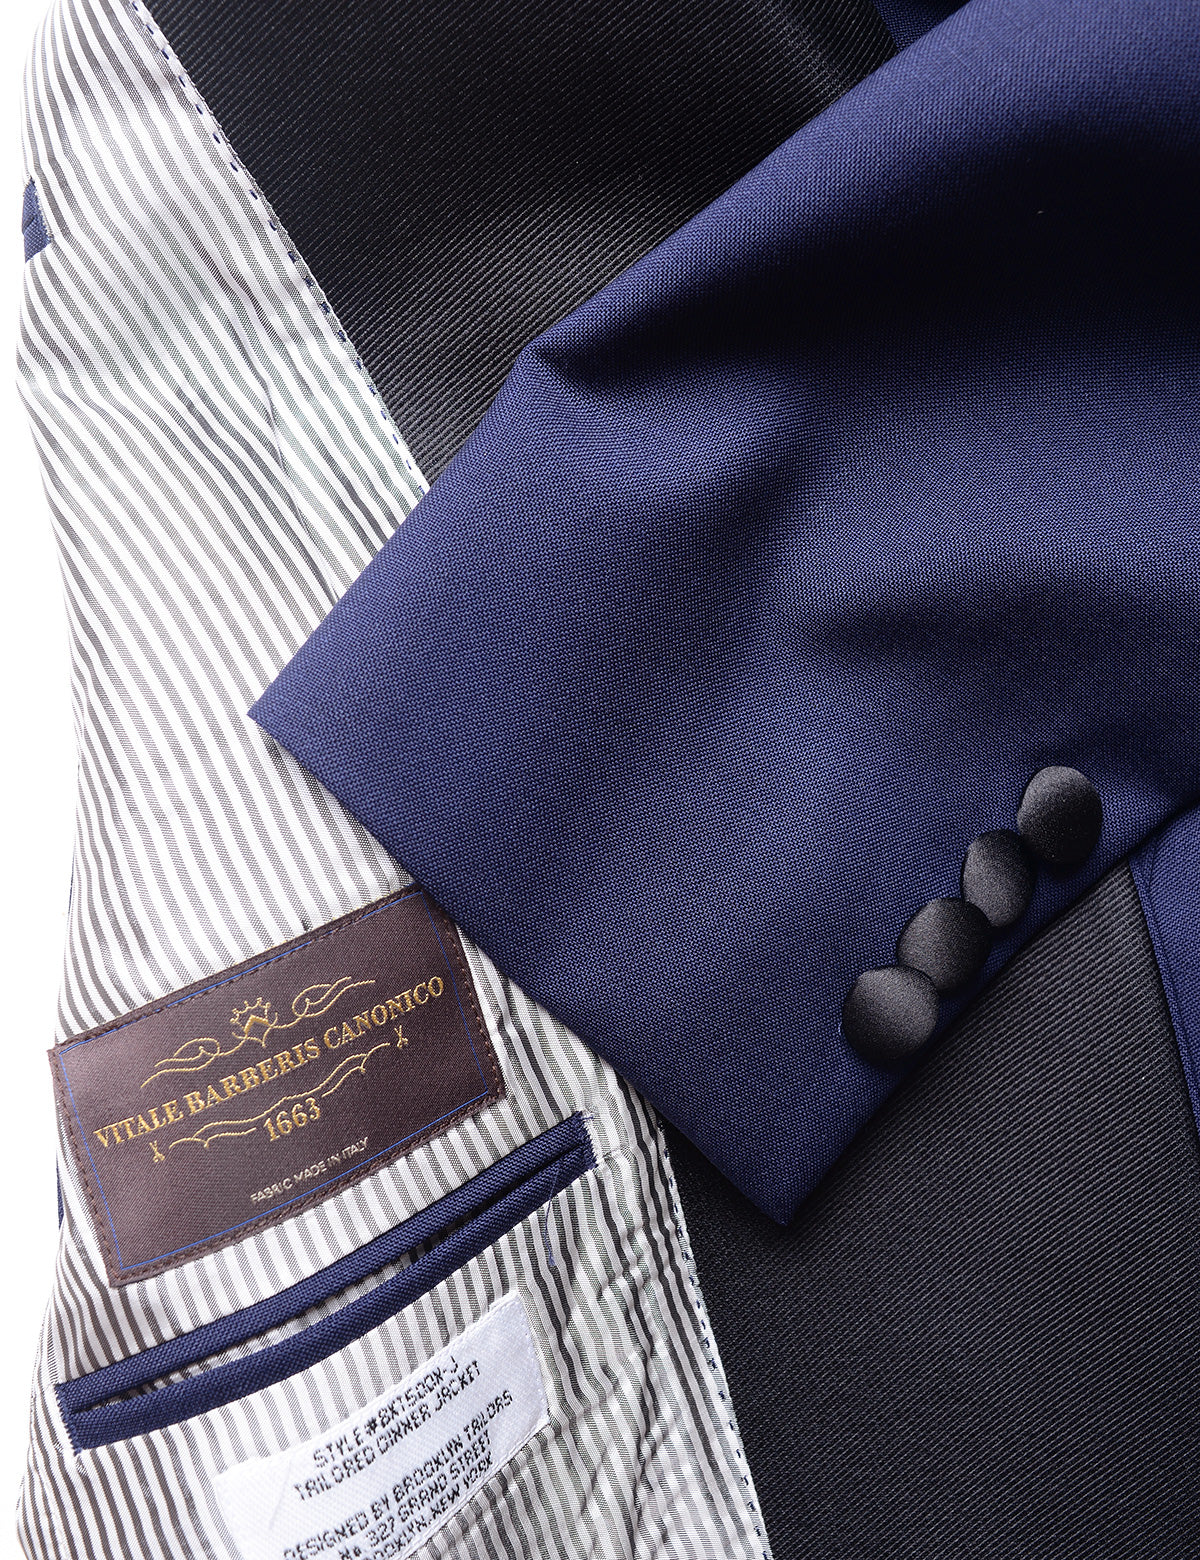 Detail shot of Brooklyn Tailors BKT50 Shawl Collar Tuxedo Jacket in Wool / Mohair - Ink Blue with Grosgrain Lapel showing Vitale Barberis Canonico label in interior of jacket